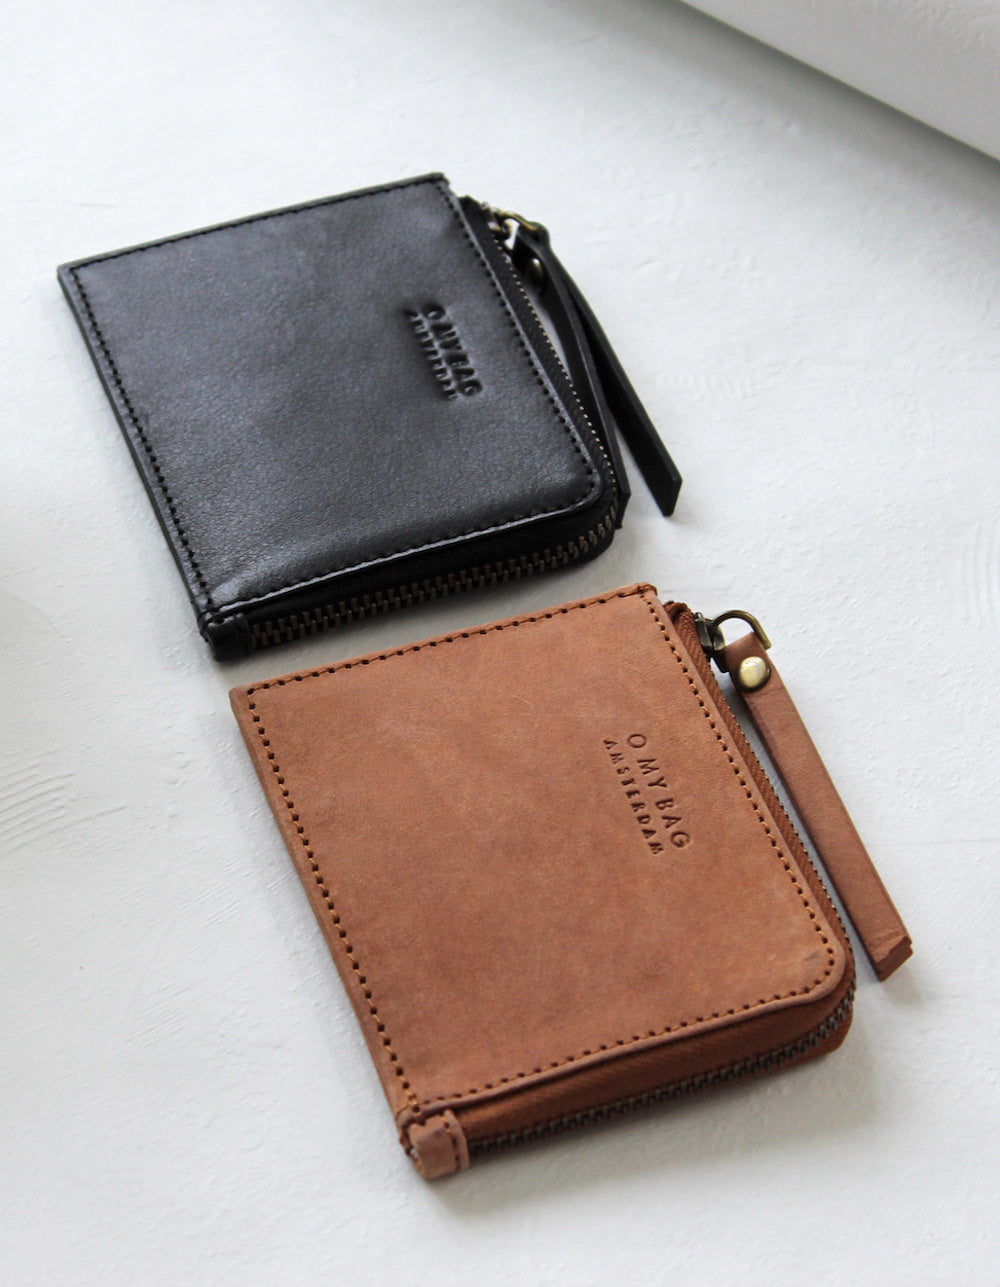 Genuine Leather Functional Trifold Classic Mens Wallet with Coin Pocket  Navy Blue » Anitolia